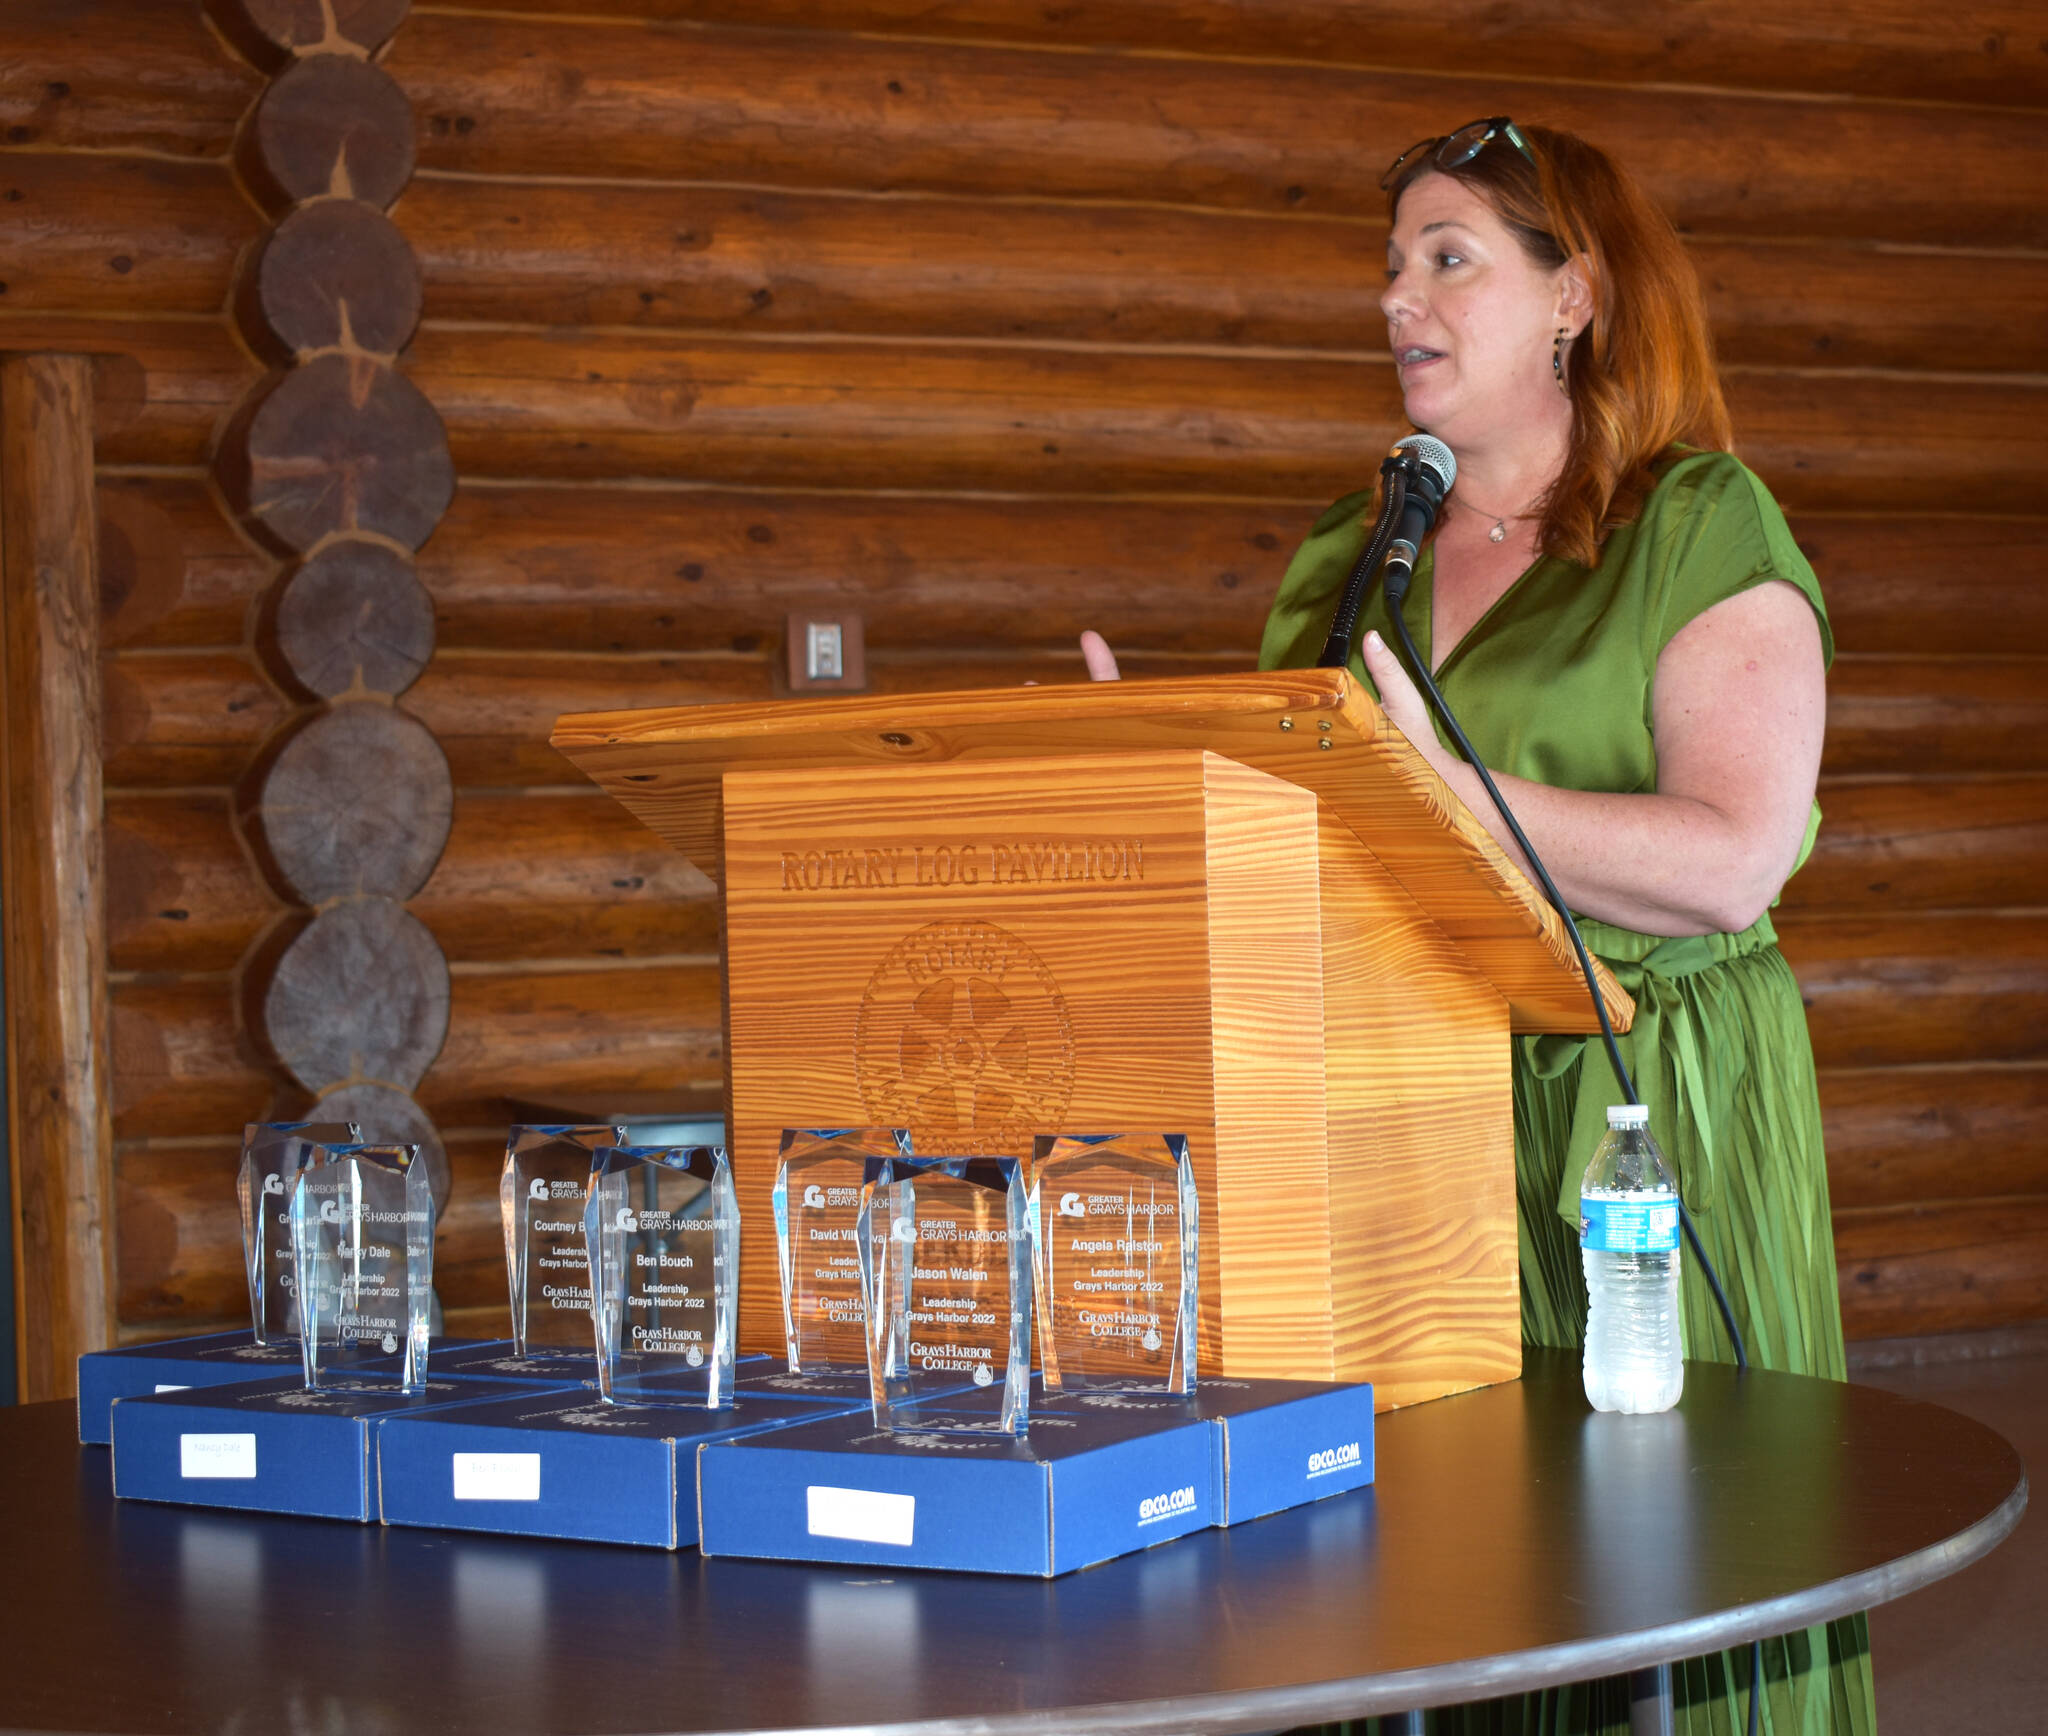 Lynnette Buffington, CEO for Greater Grays Harbor, Inc. talks about how the recruitment and retention issues that face local  police and fire departments also extend into the private sector during the business forum luncheon on Tuesday, July 26, at Rotary Log Pavilion. (Matthew N. Wells | The Daily World)